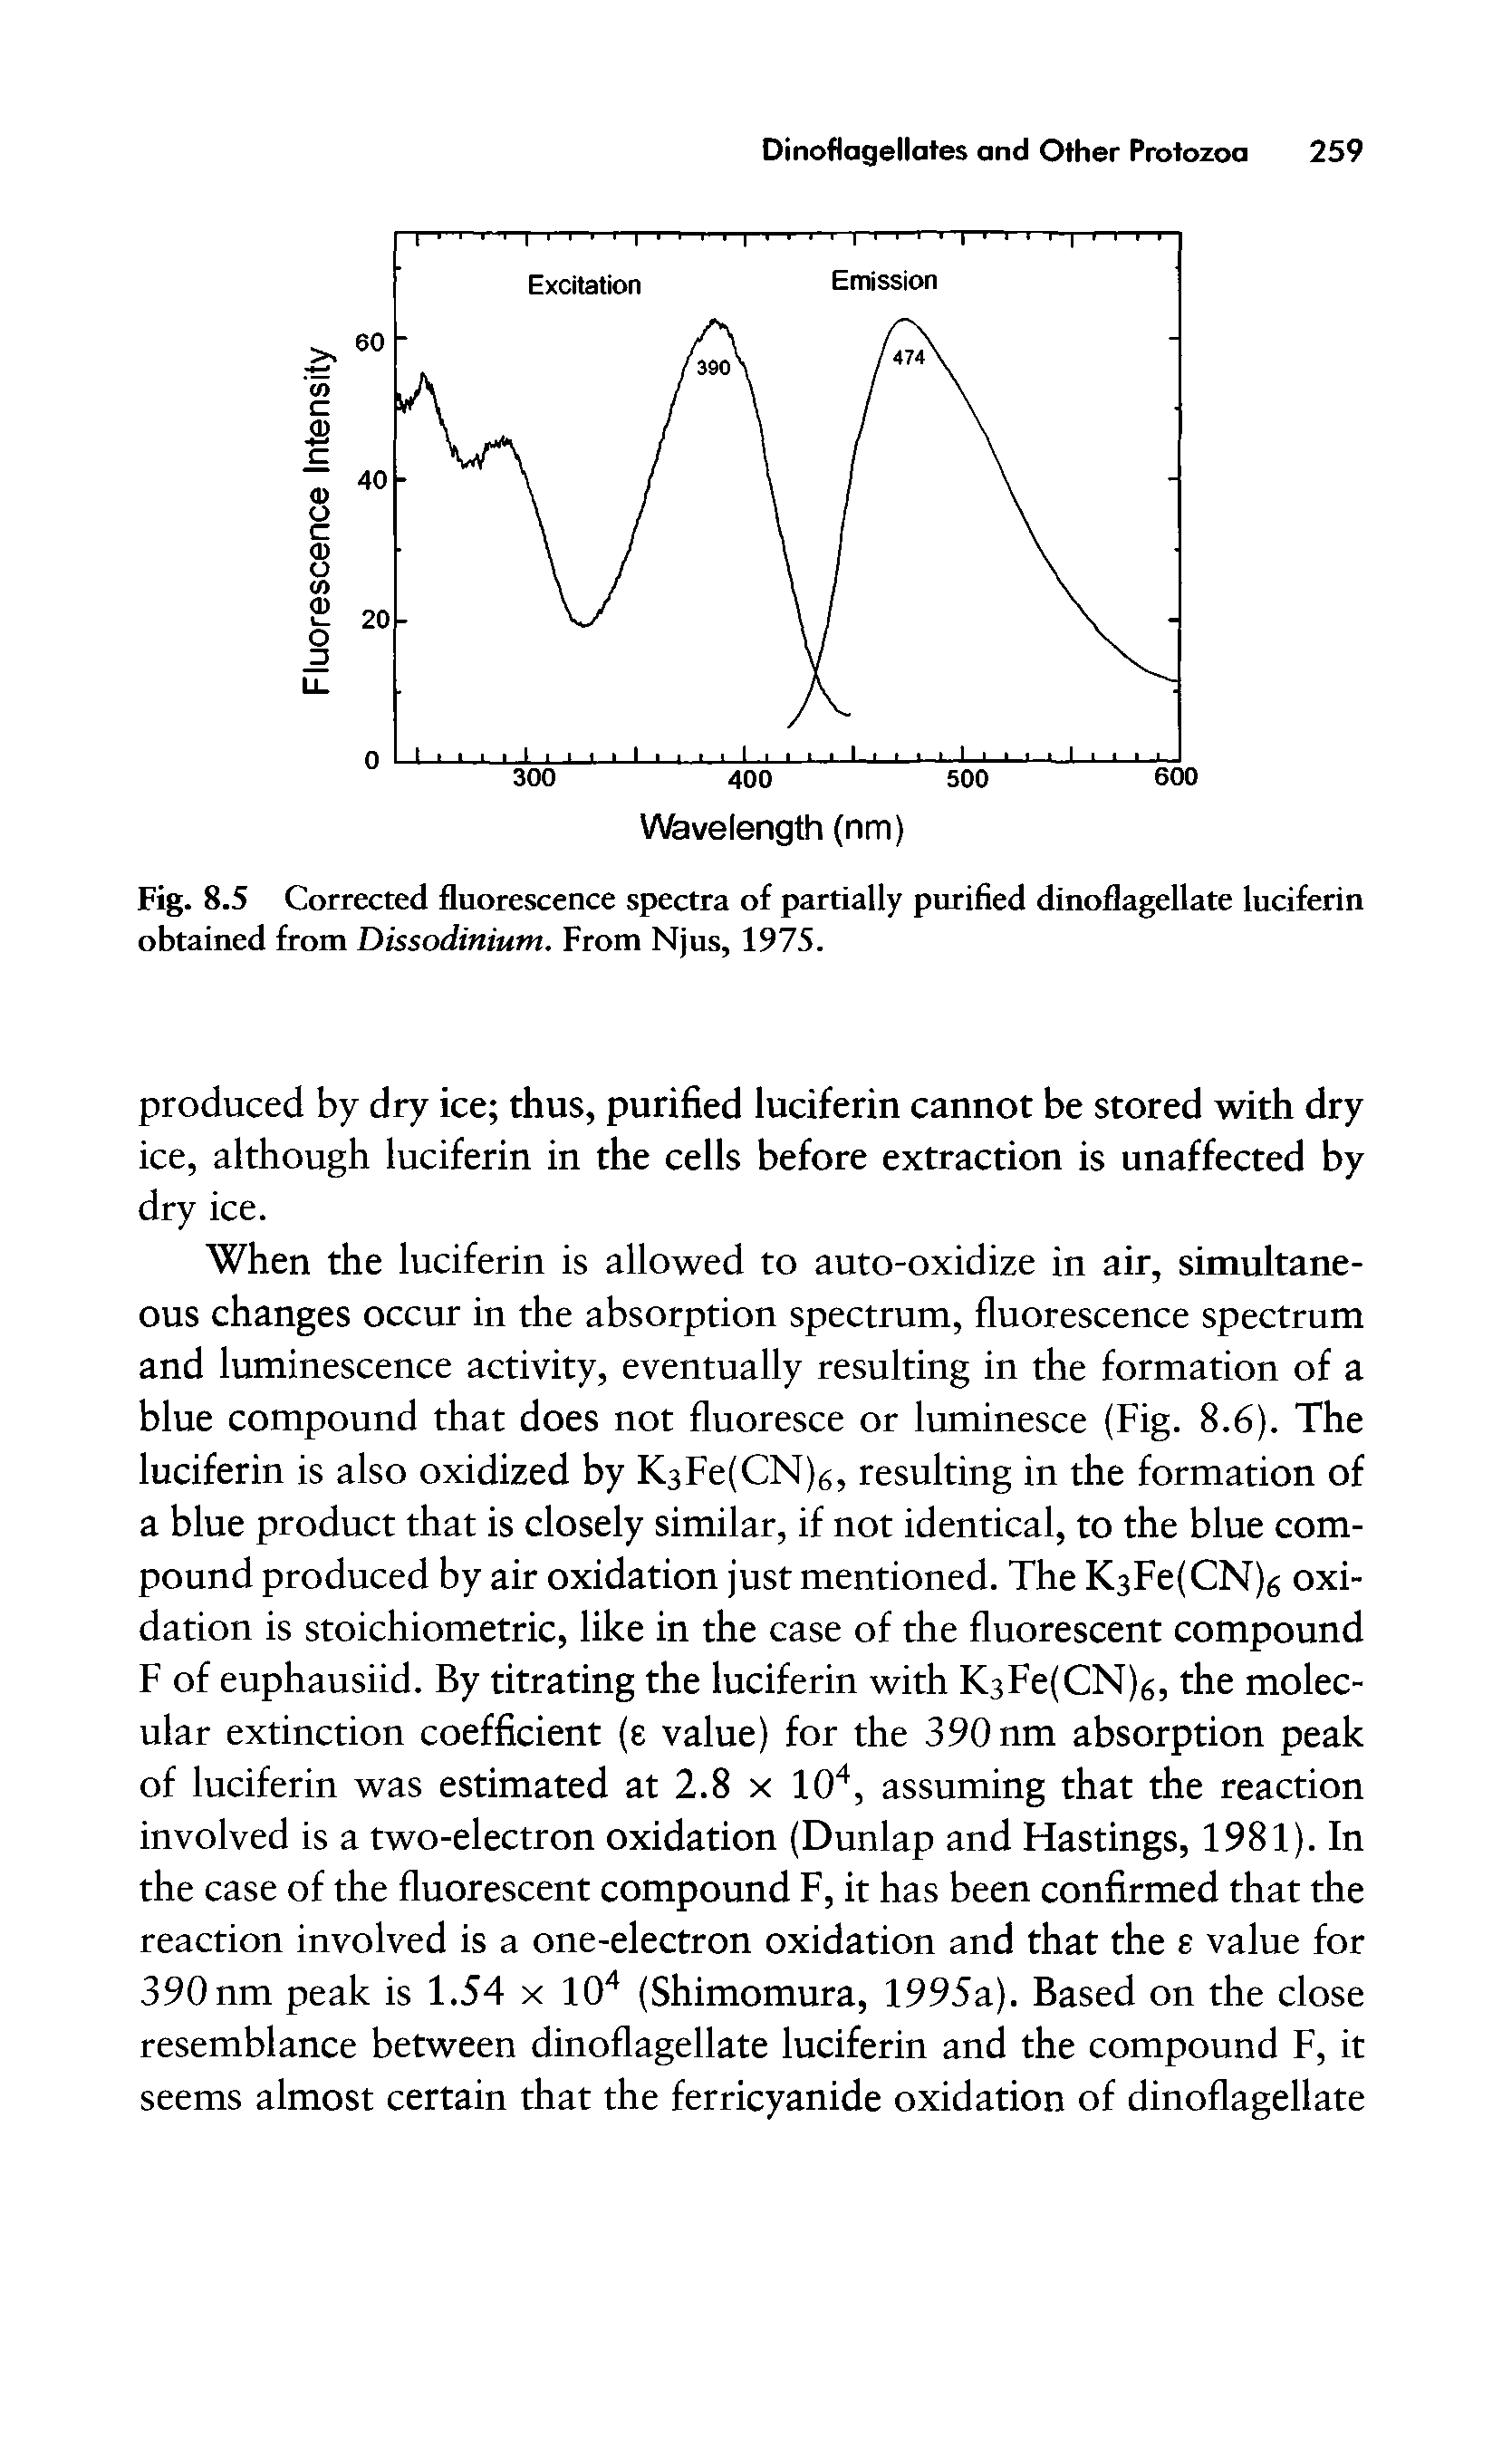 Fig. 8.5 Corrected fluorescence spectra of partially purified dinoflagellate luciferin obtained from Dissodinium. From Njus, 1975.